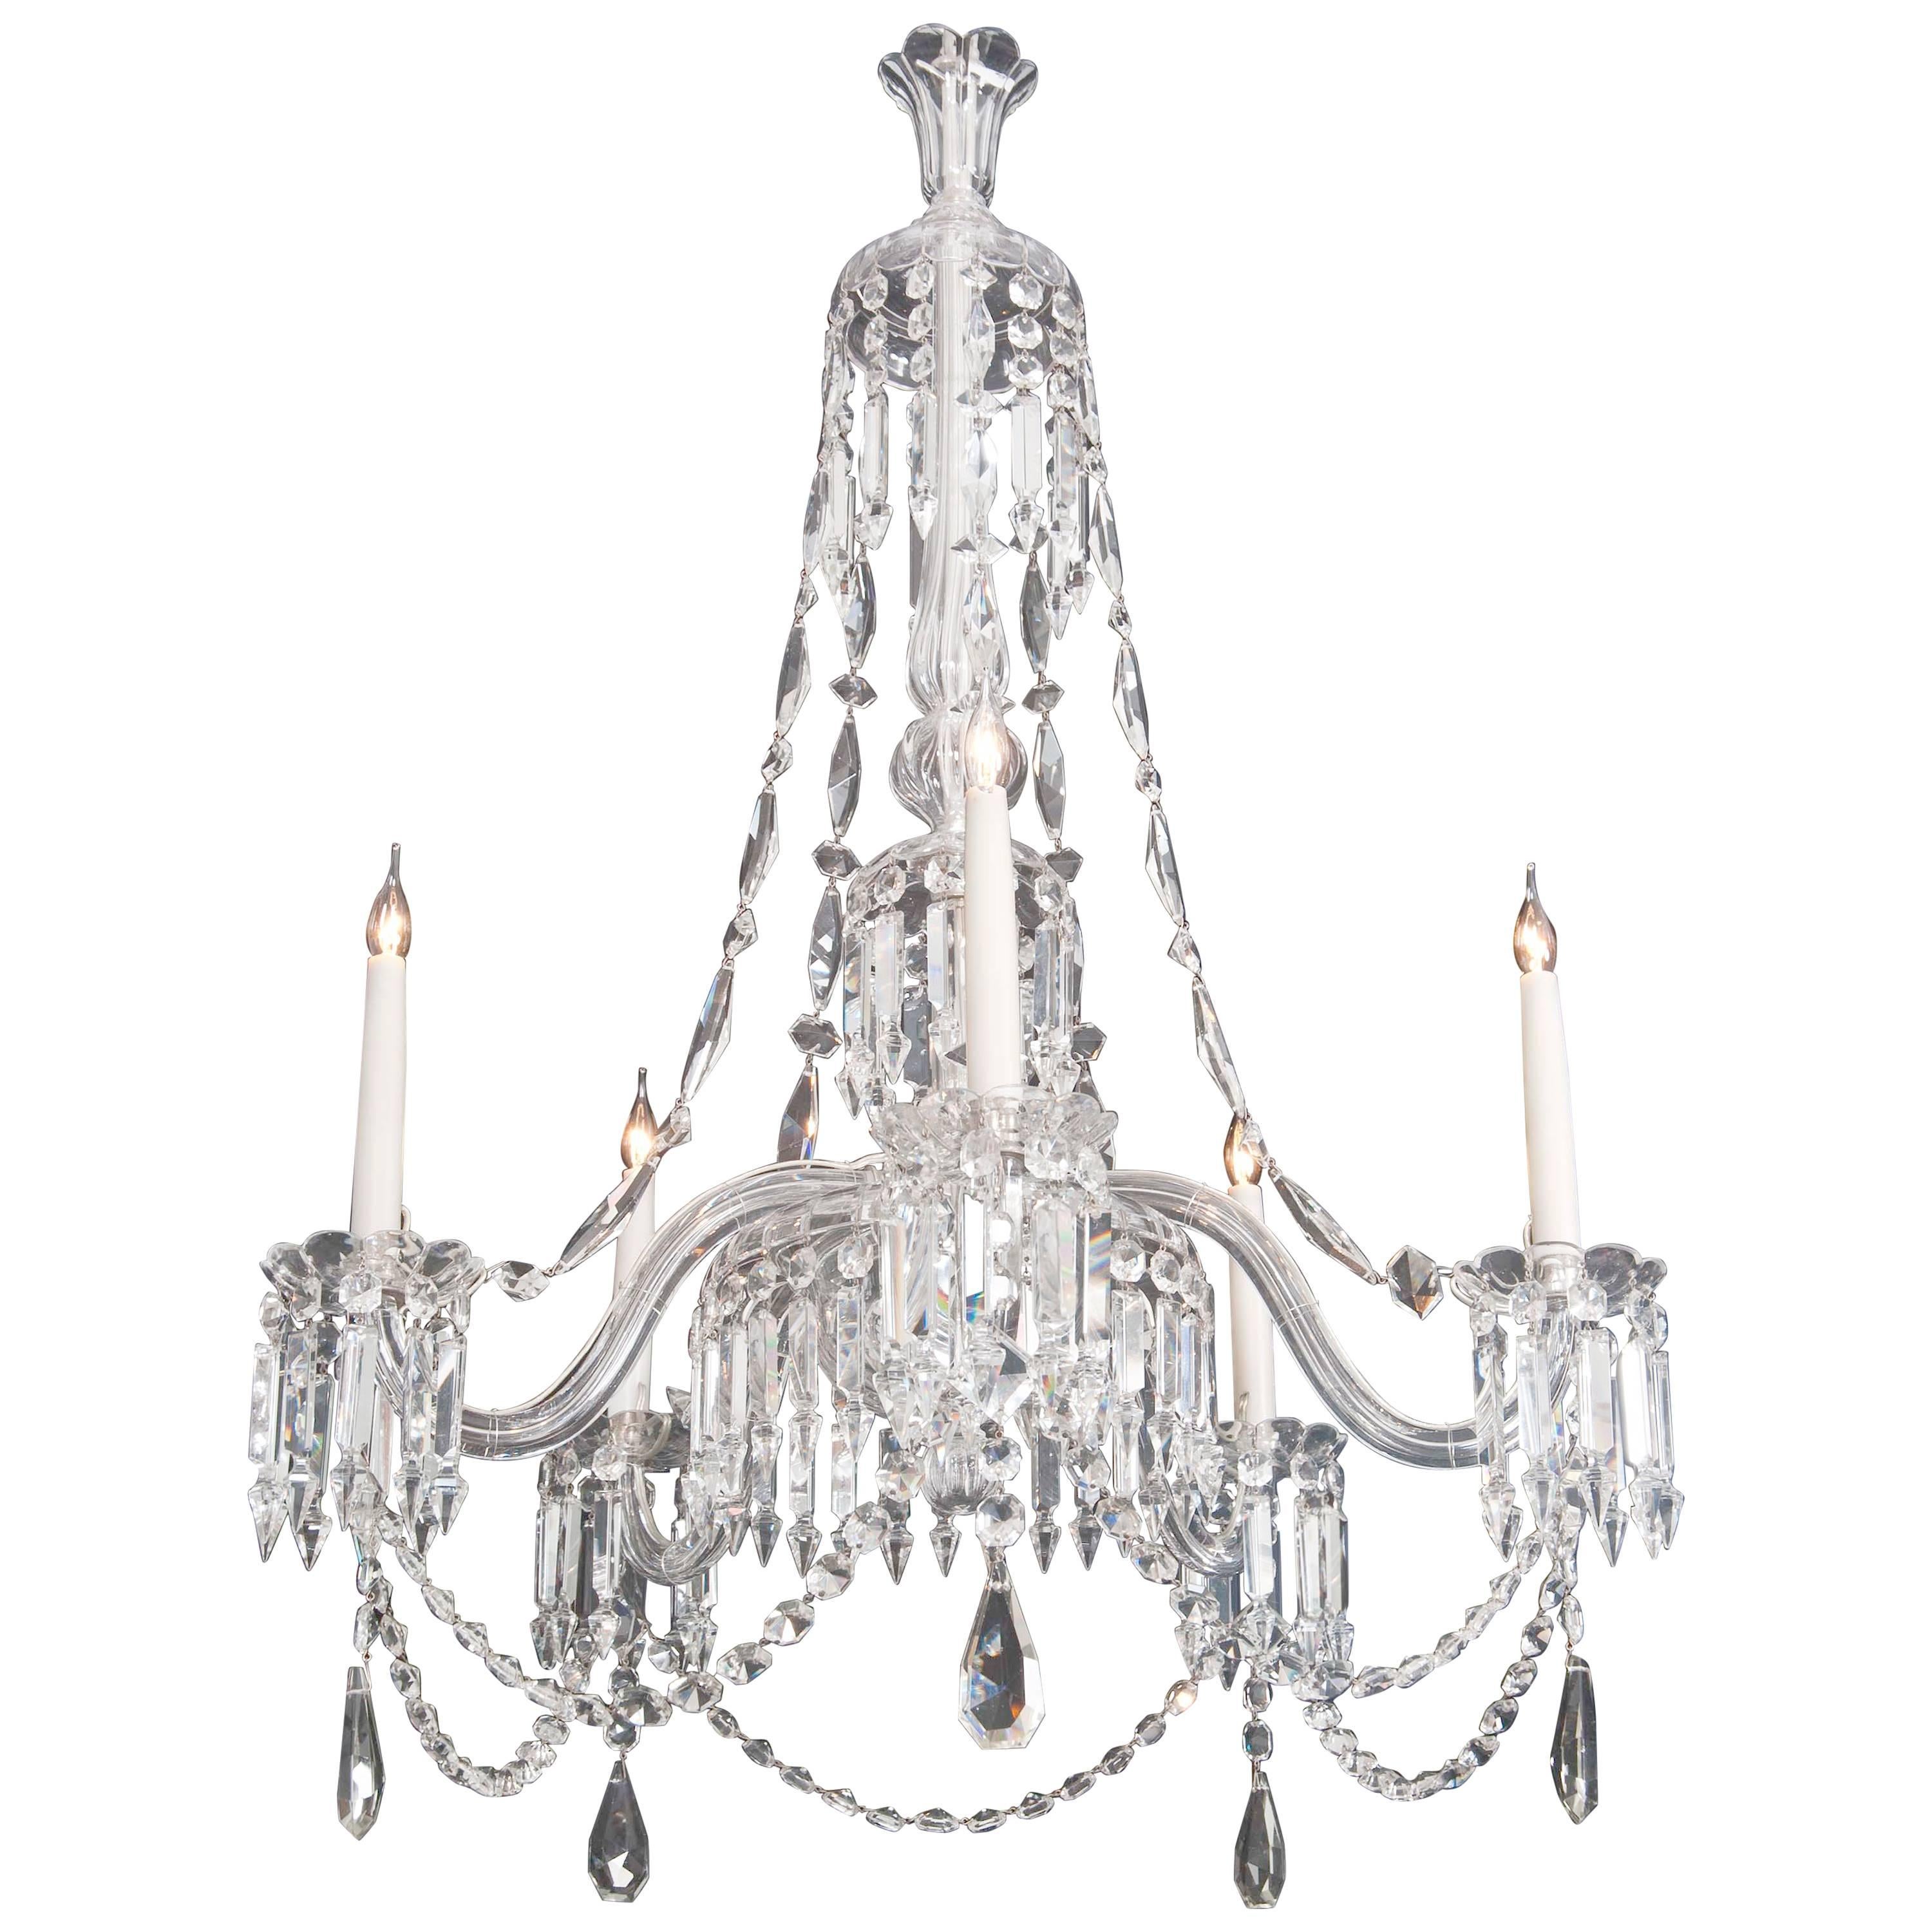 Good Mid-Victorian Cut and Moulded Glass Antique Chandelier by F&C Osler